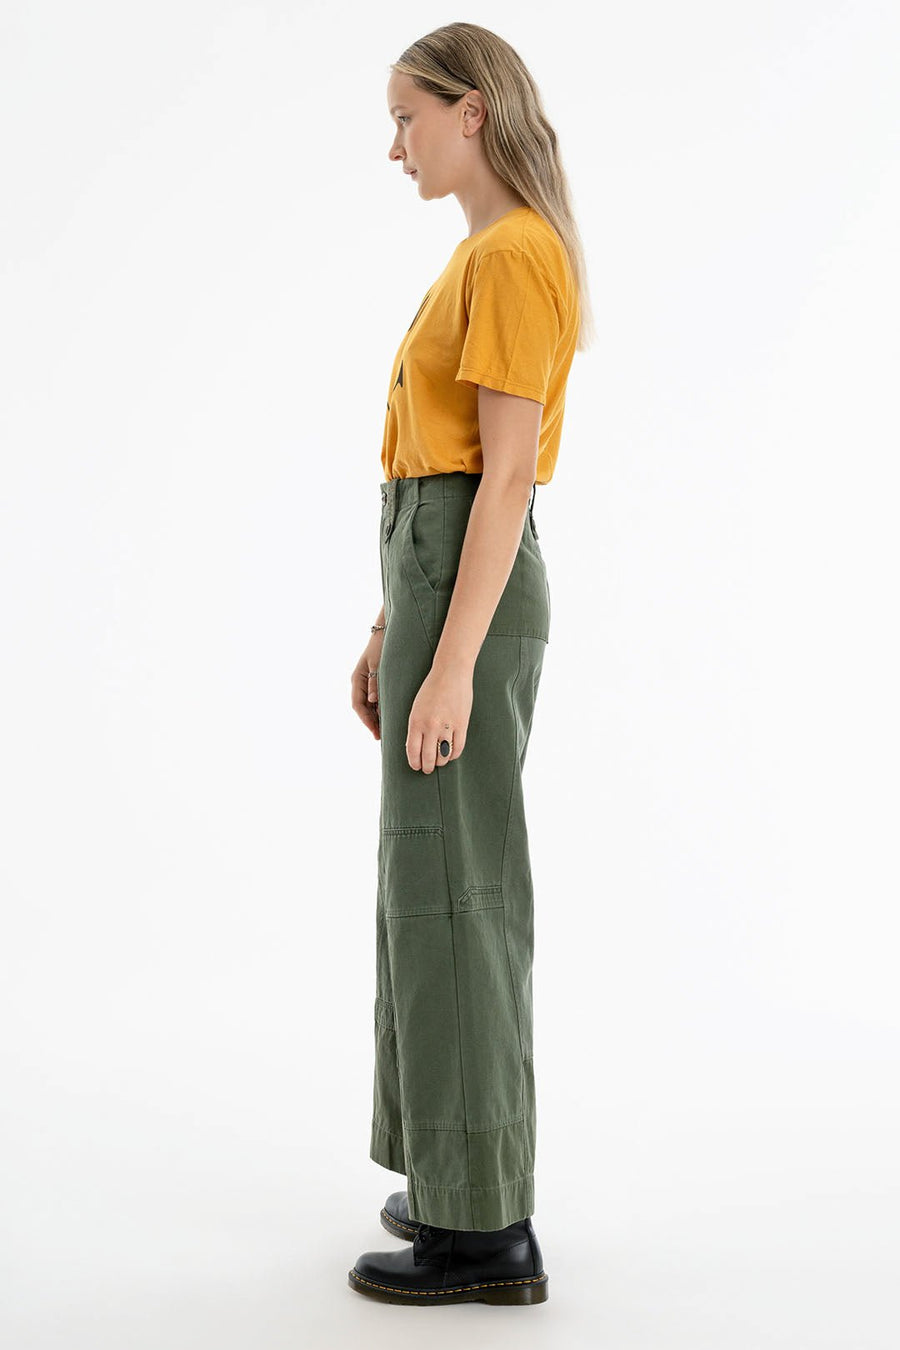 LOVE NOT WAR LONG PANT, ARMY - Burning Torch Online Boutique